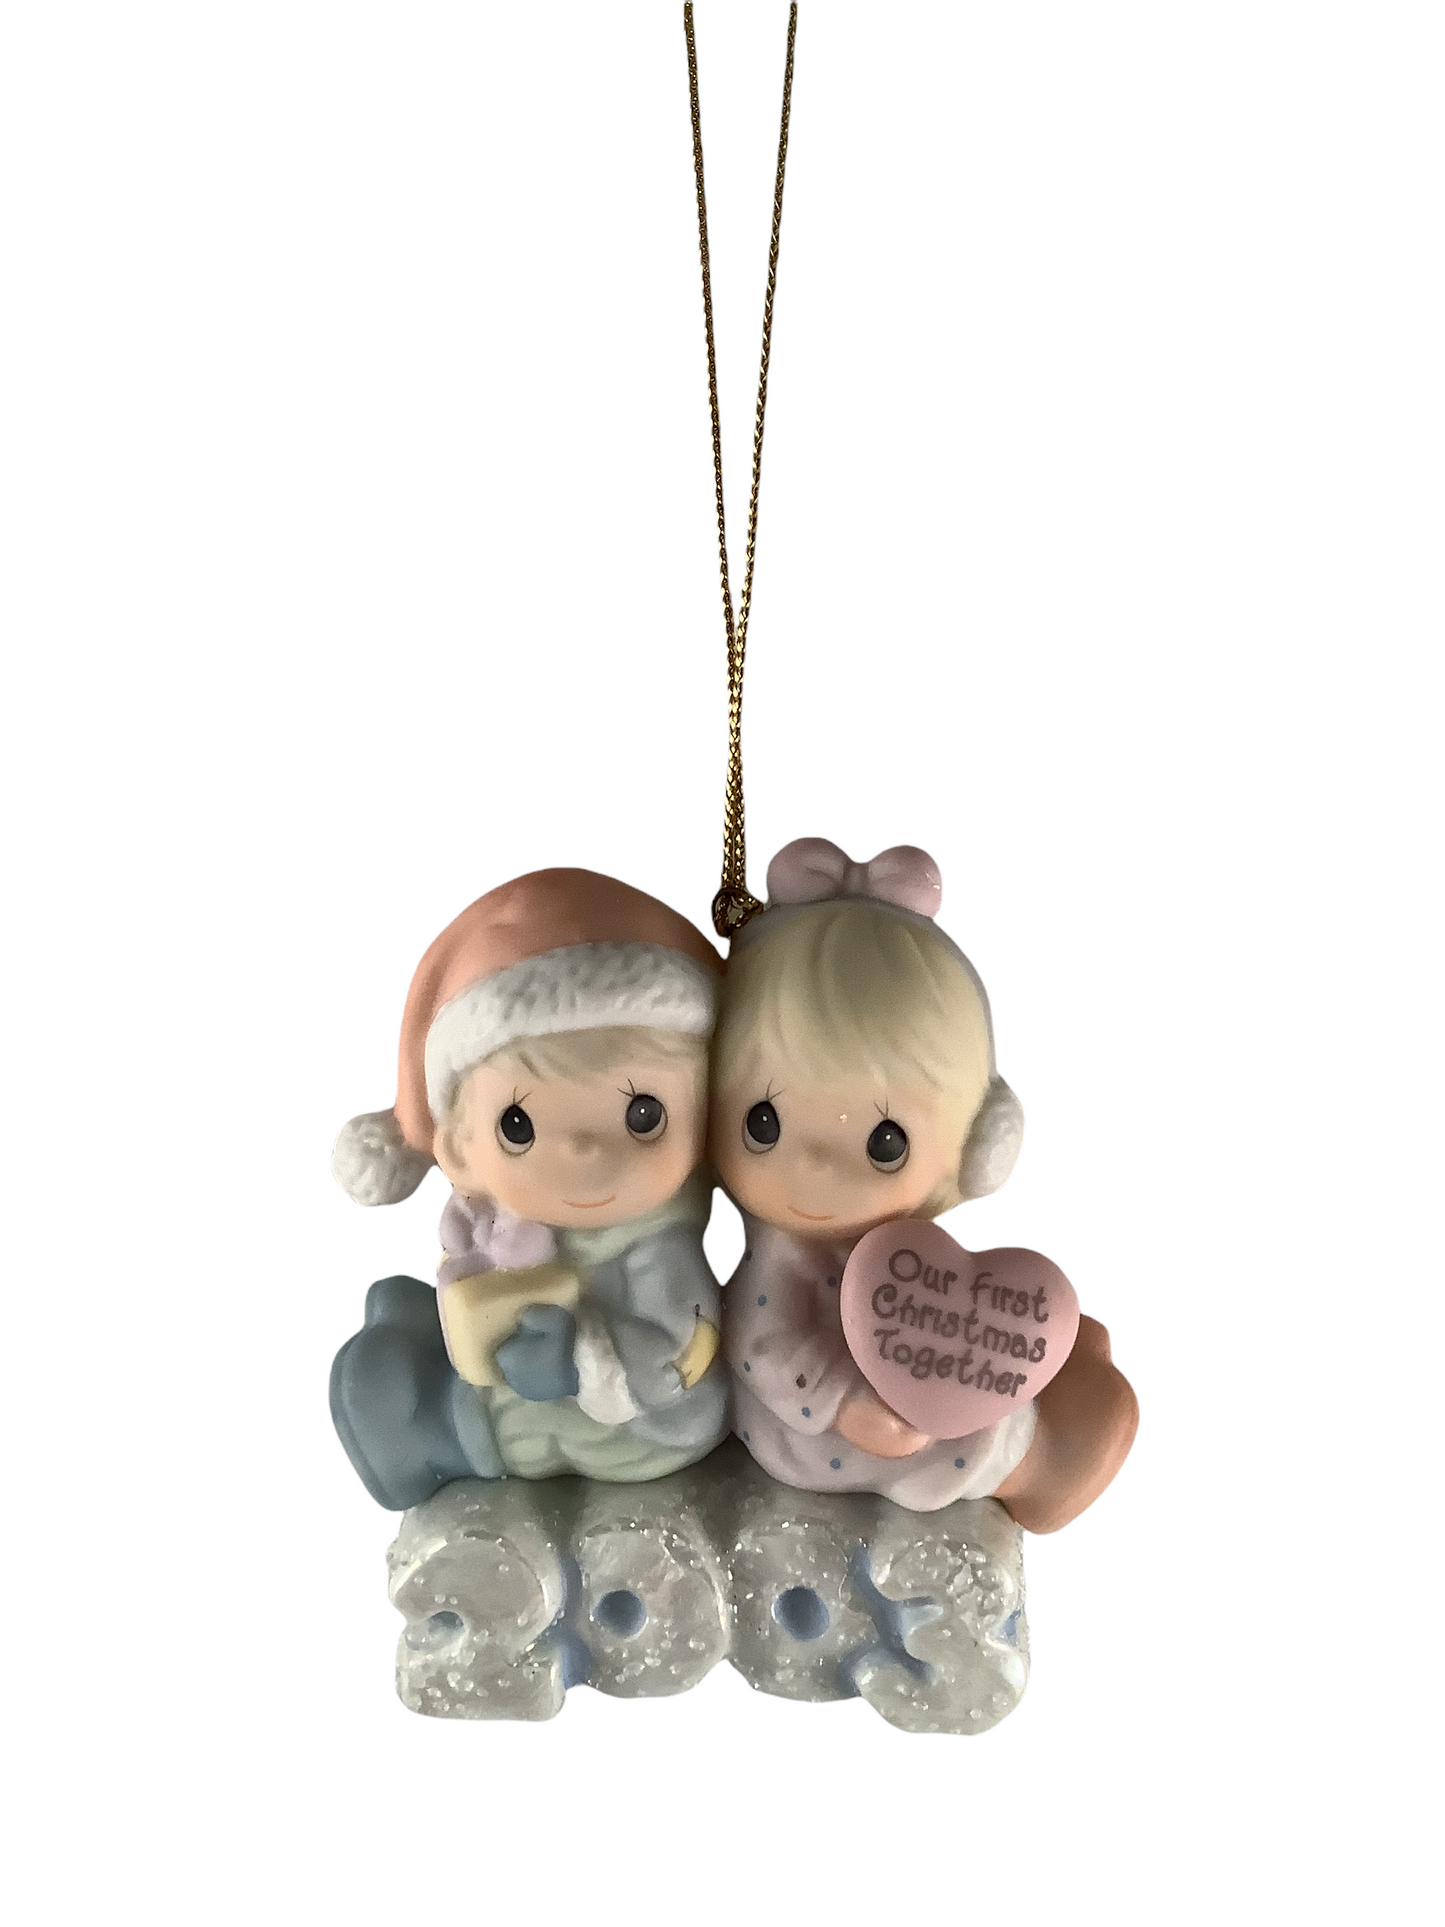 Our First Christmas Together 2003 - Precious Moment Ornament